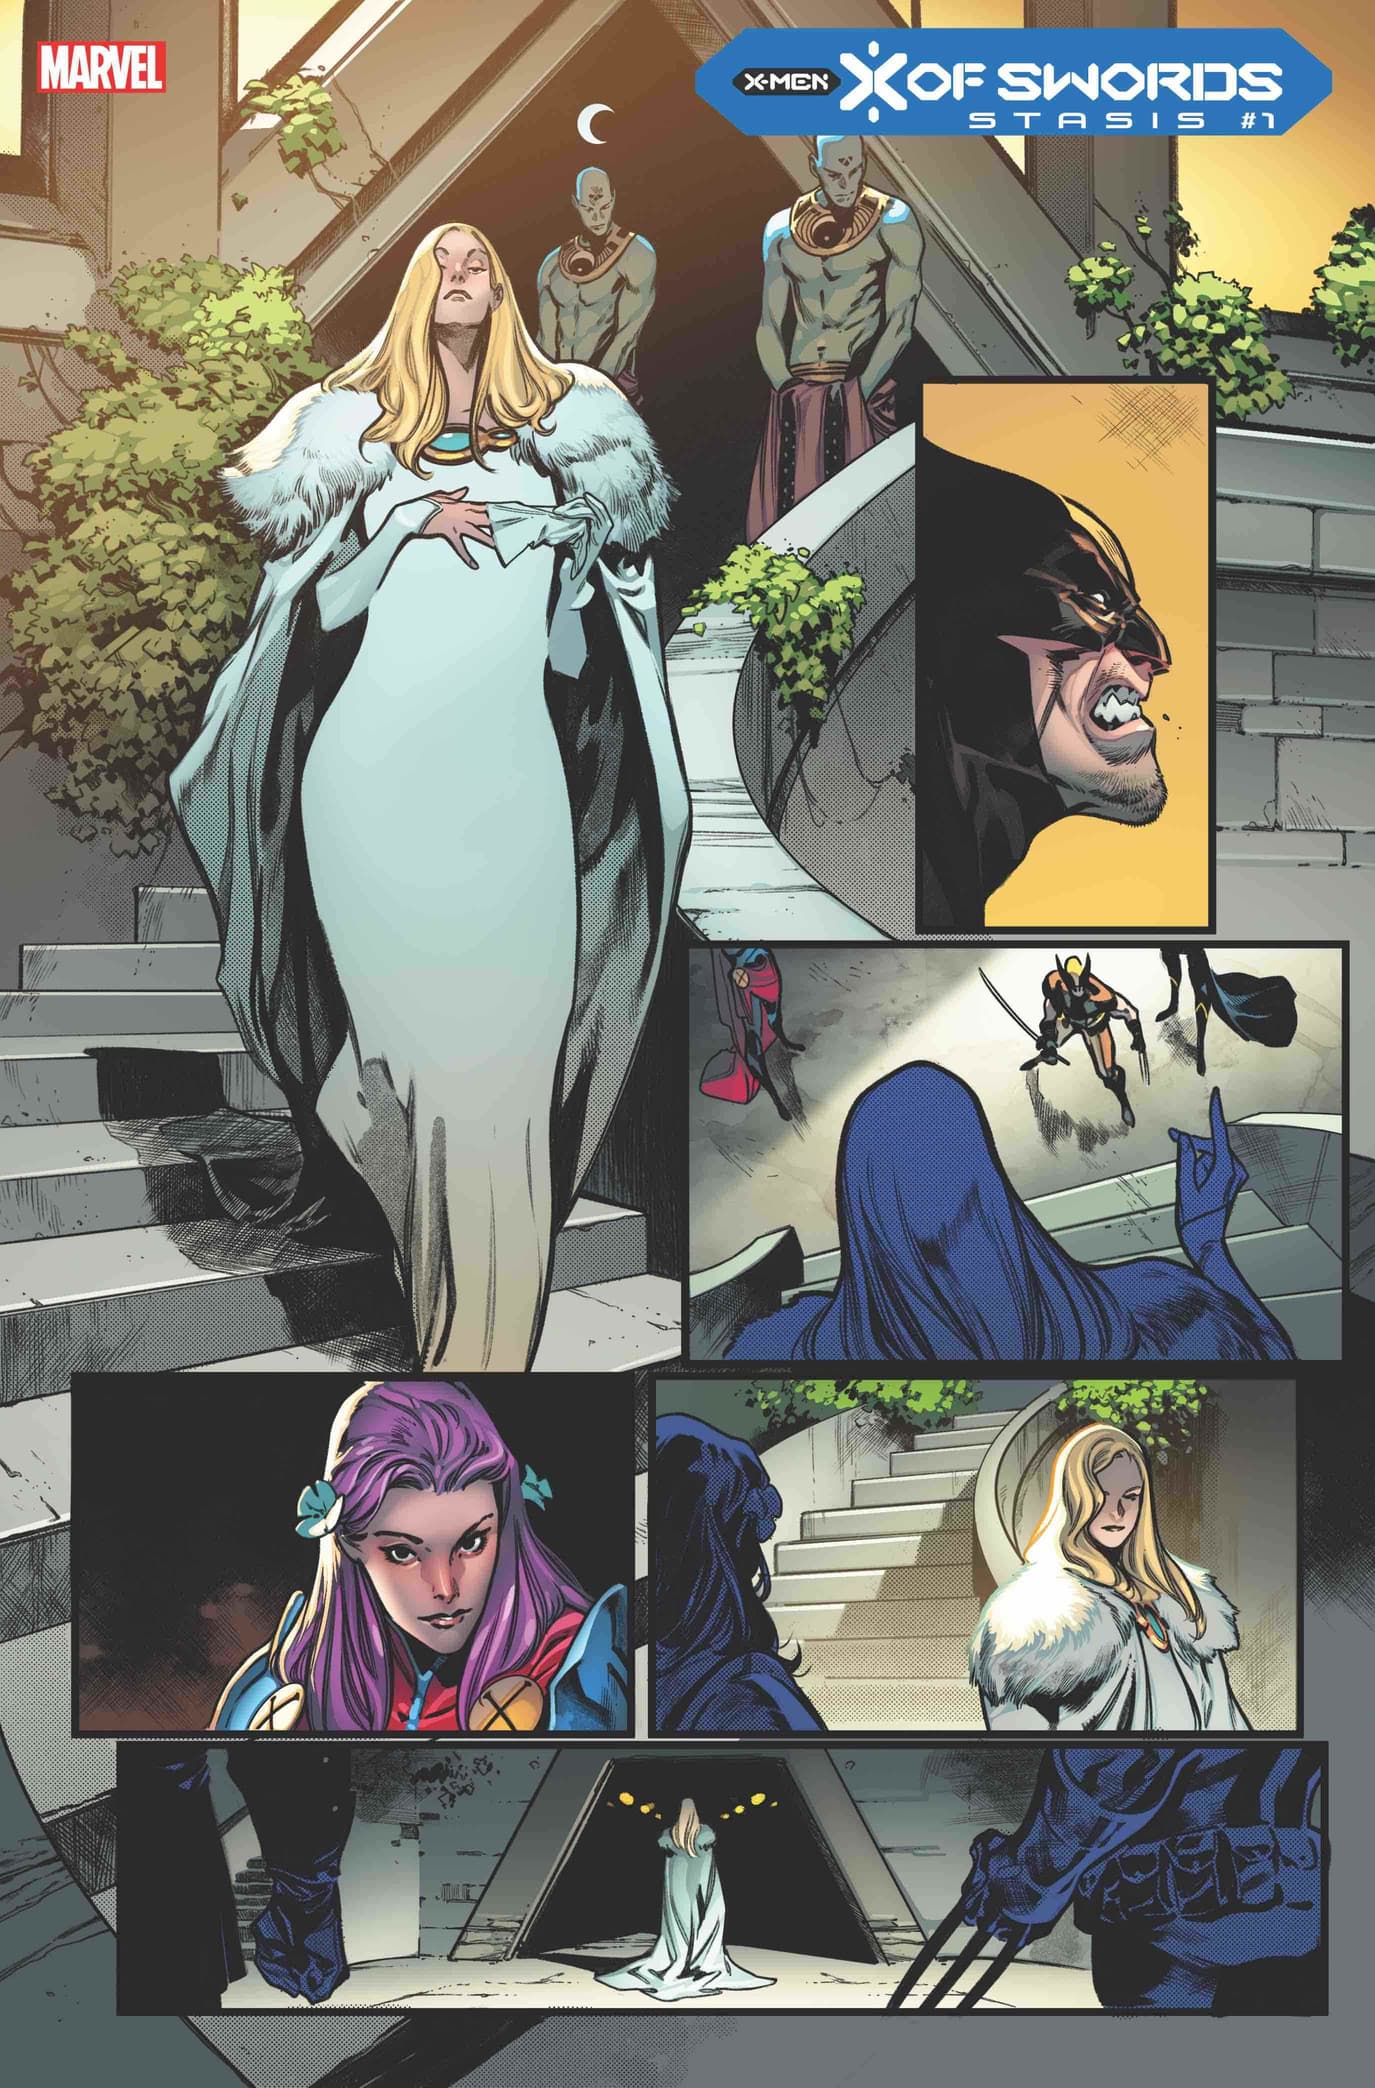 X OF SWORDS: STASIS #1 preview interiors by Pepe Larraz with colors by Marte Gracia